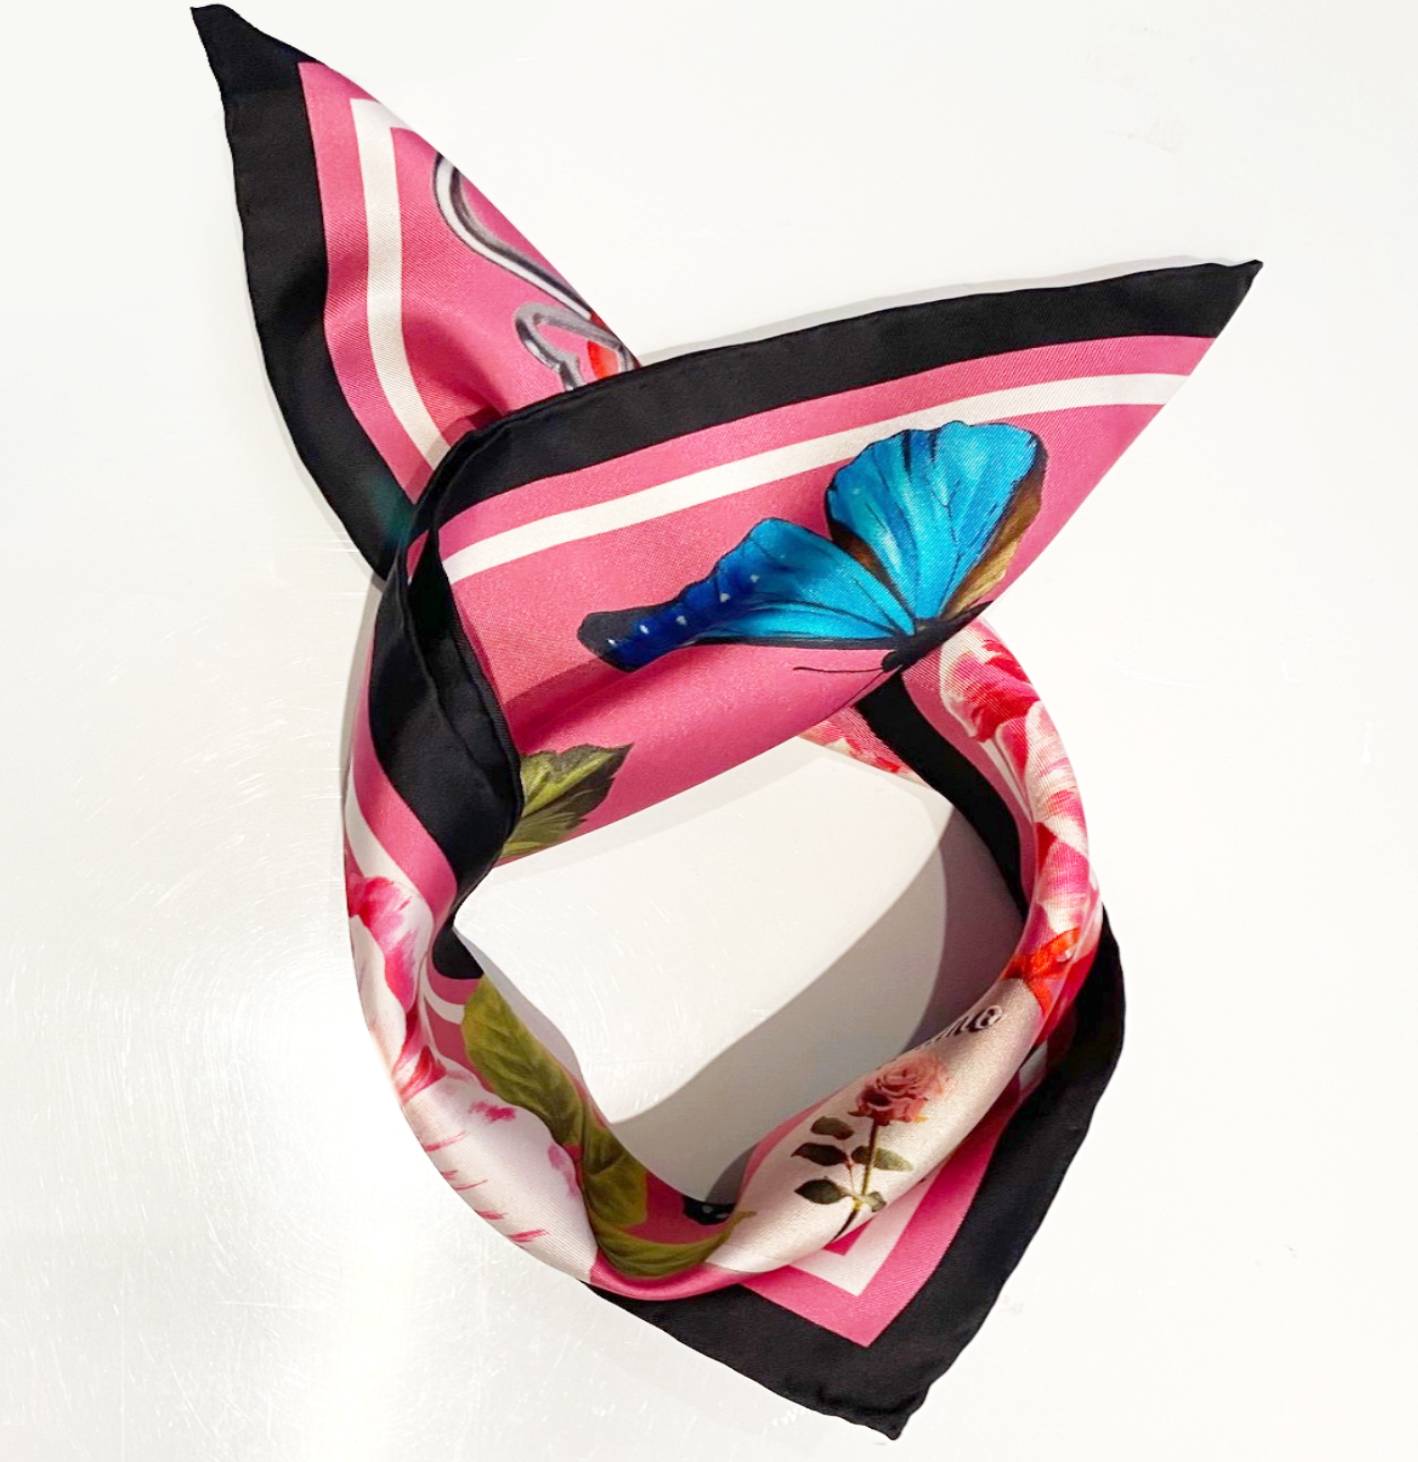 Dolce & Gabbana Floral Pink Silk Square Scarf - style - CHNGR